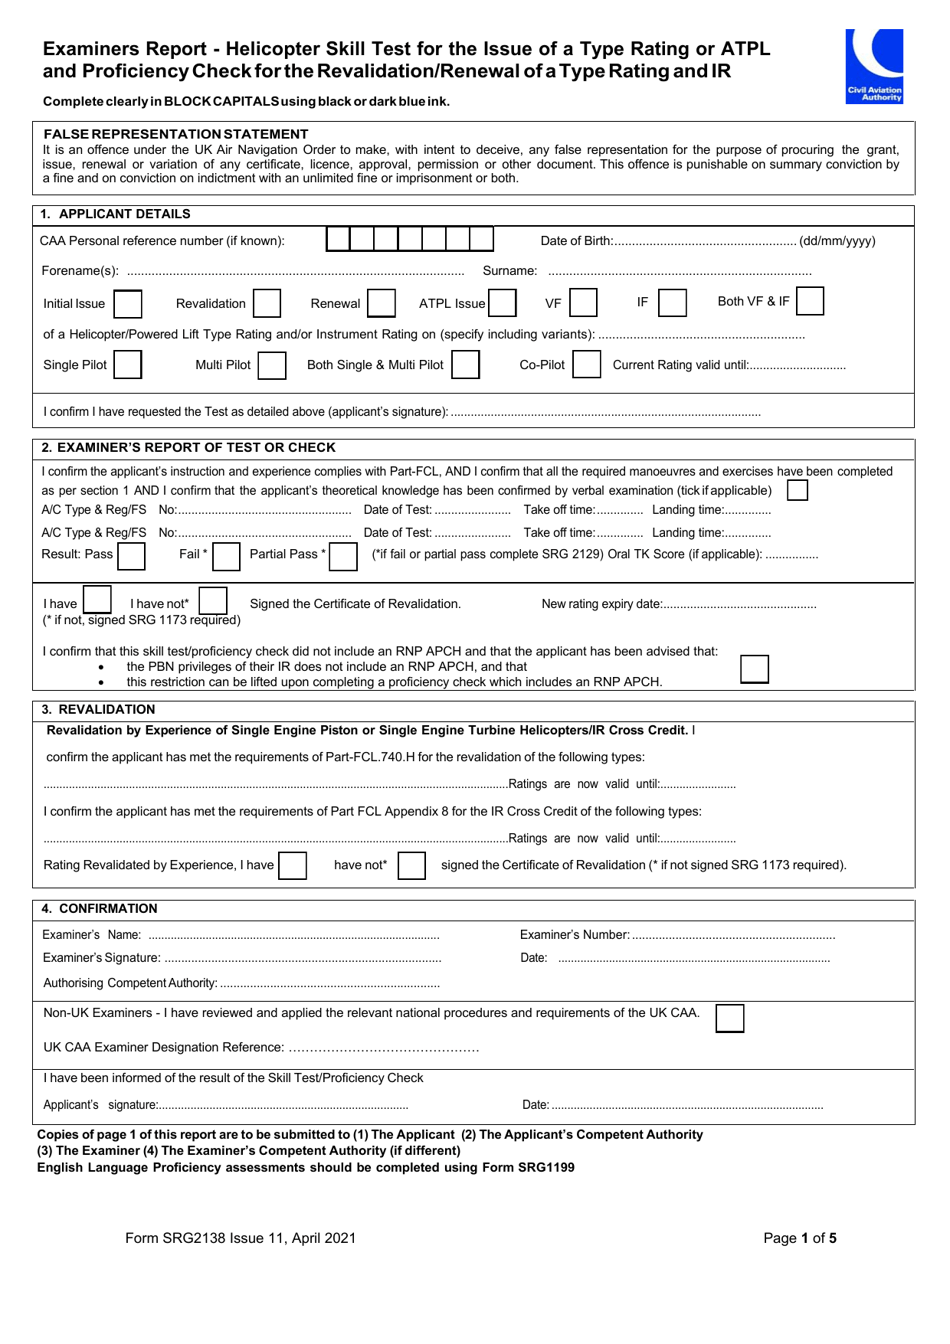 Form SRG2138 Examiners Report - Helicopter Skill Test for the Issue of a Type Rating or Atpl and Proficiencycheckfortherevalidation / Renewal of a Type Rating and Ir - United Kingdom, Page 1